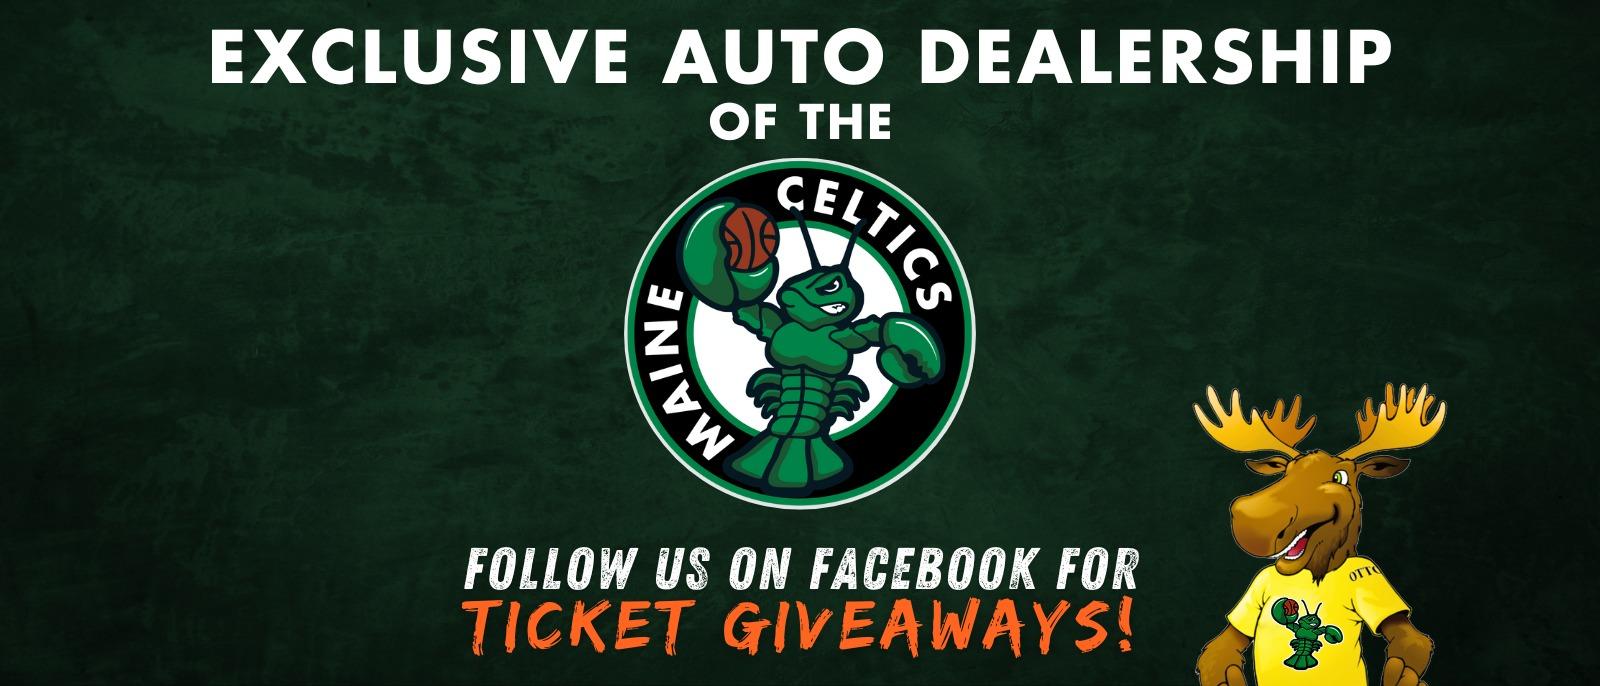 Exclusive Auto Dealership of the Maine Celtics
Follow up on Facebook for Ticket Giveaways!